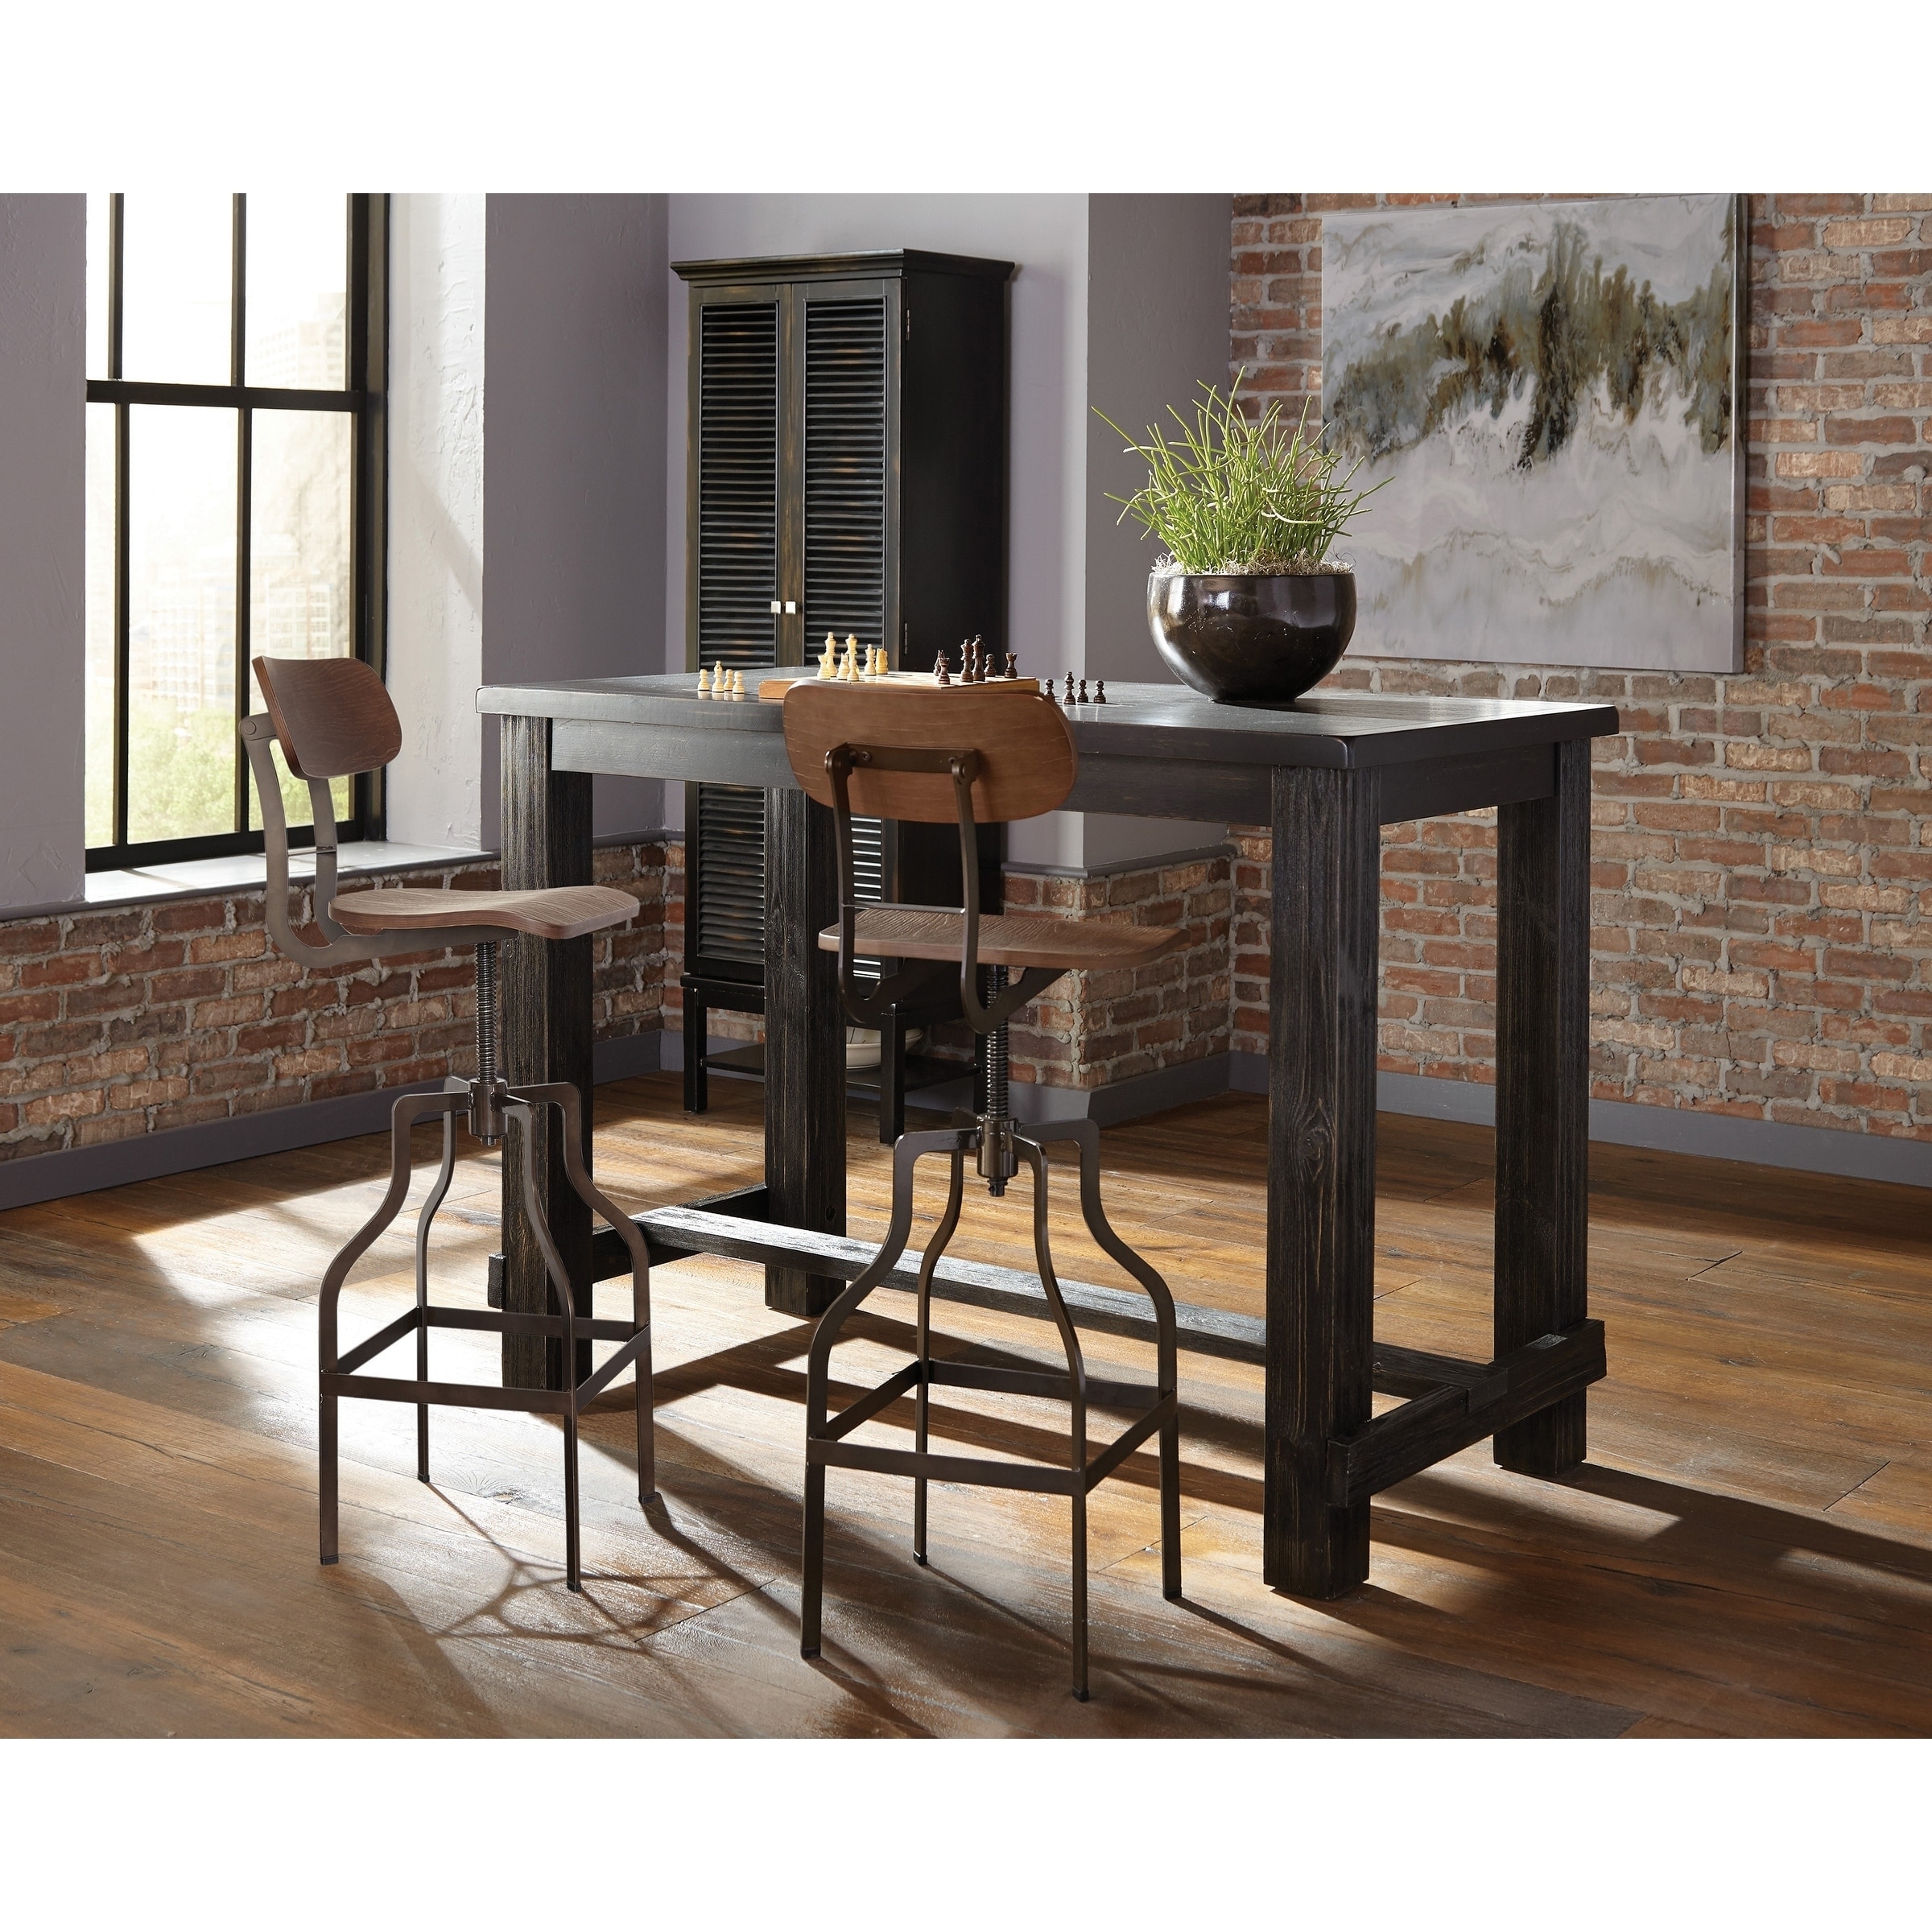 3 Piece Pub Table Set You Ll Love In 2021 Visualhunt